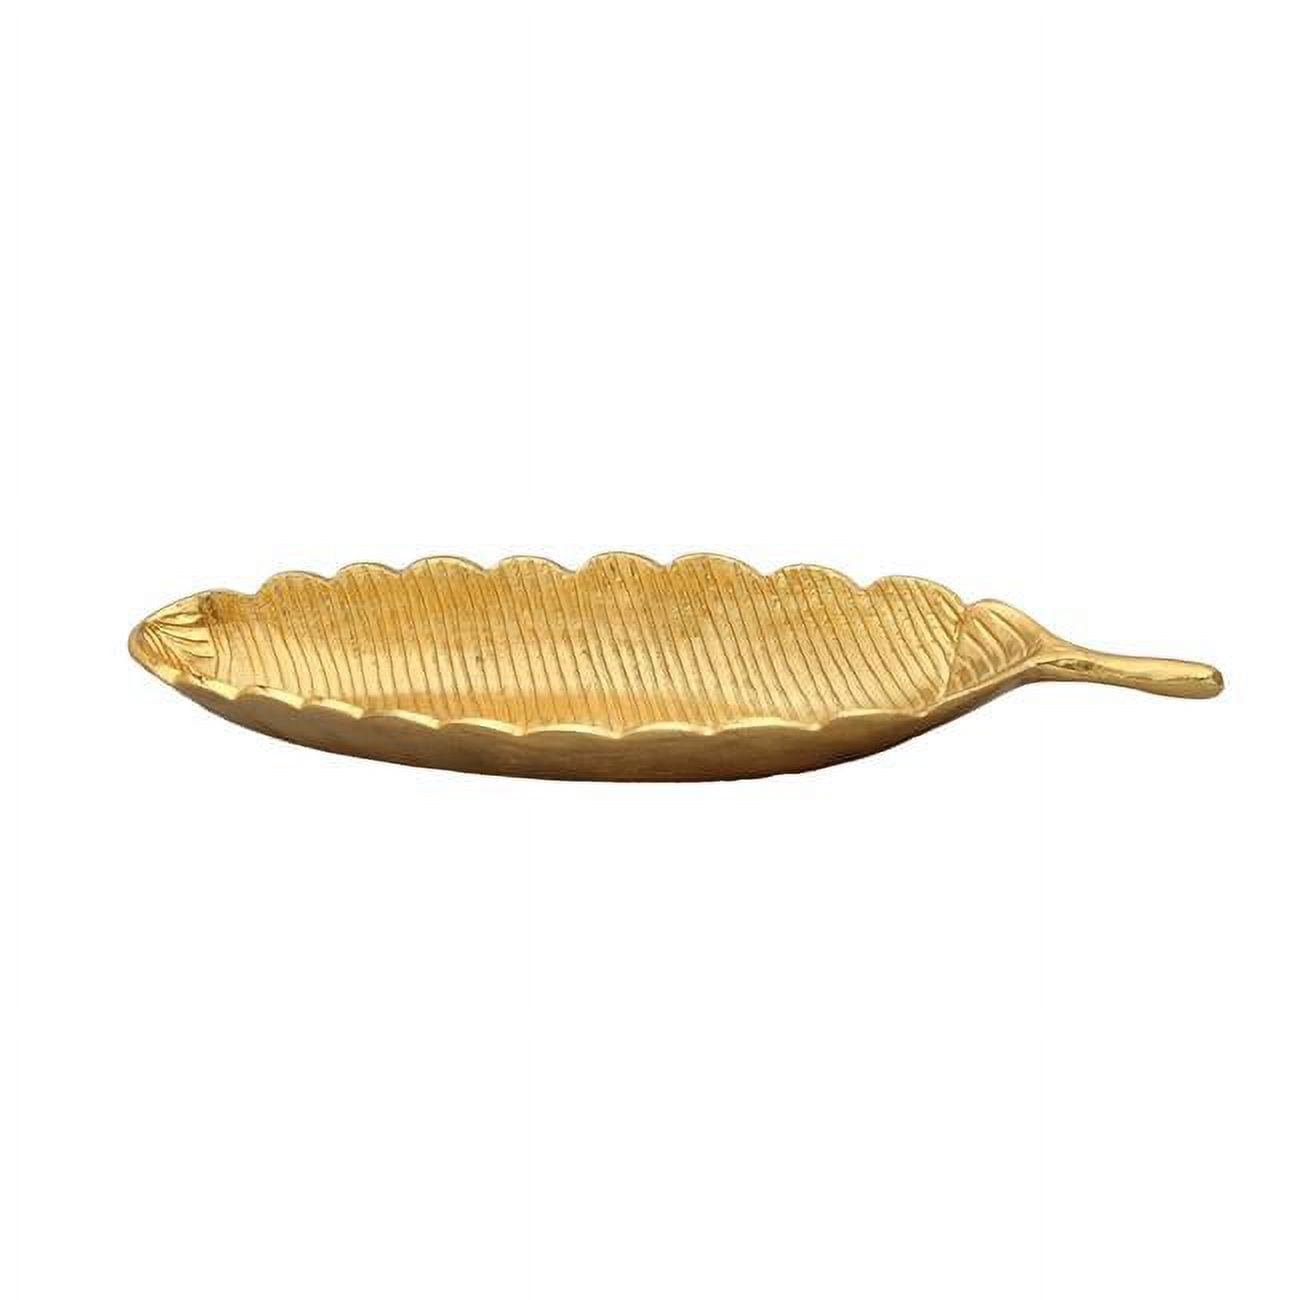 Classic Touch Lp1010 Gold Leaf Shaped Dish With Vein Design, 17 X 2 X 4 In.